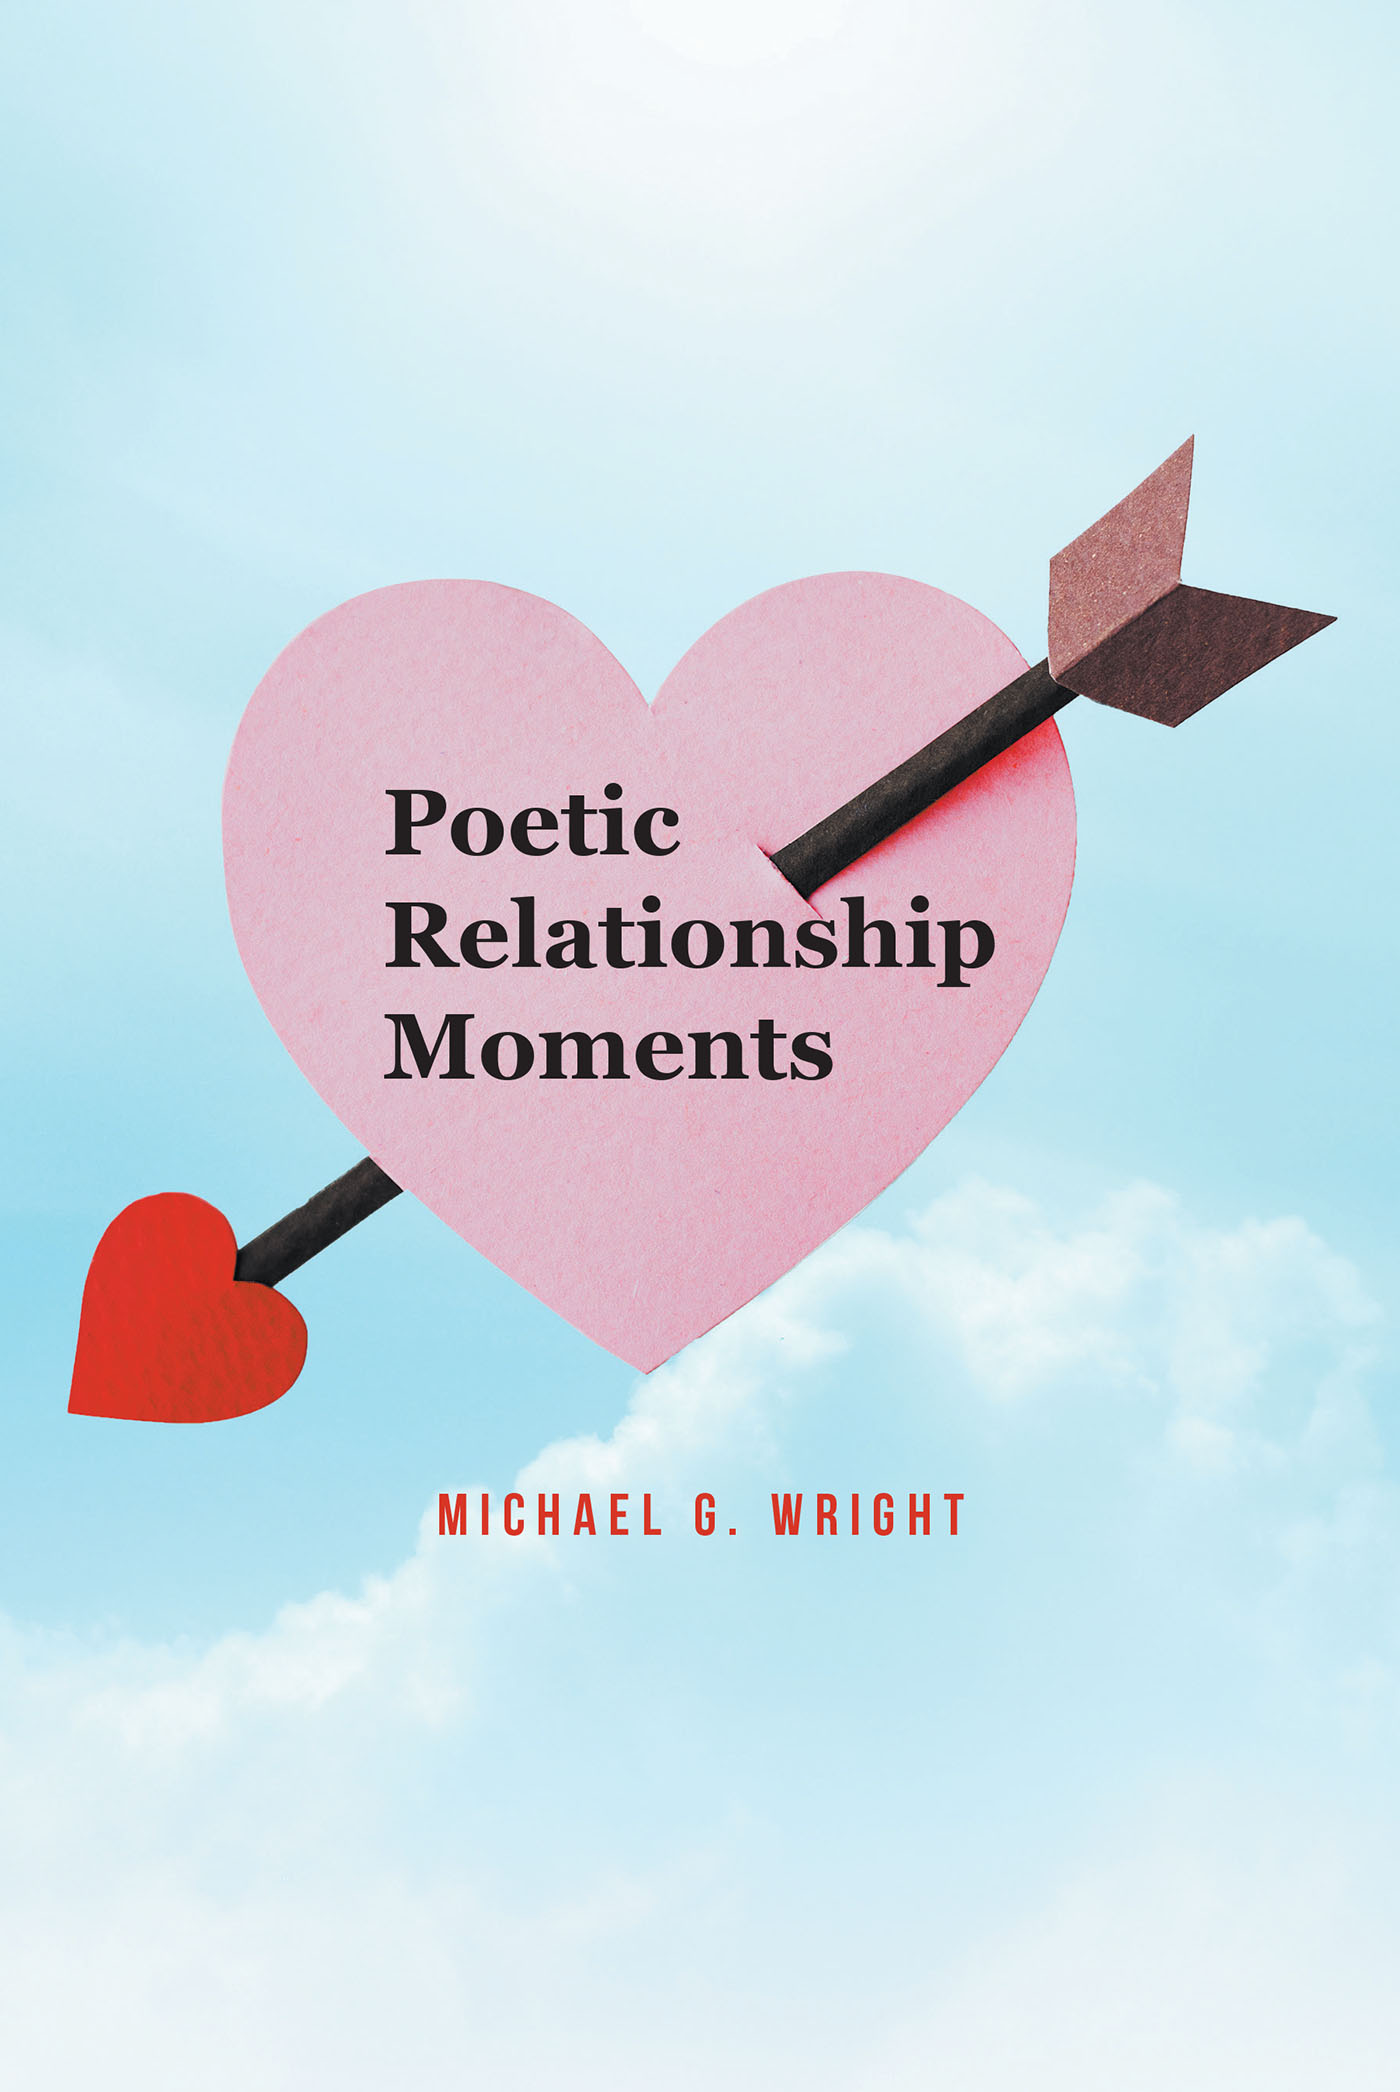 Michael G. Wright’s New Book, "Poetic Relationship Moments," a Fascinating Series That Explores the Multifaceted Nature of Romantic Relationships in Life